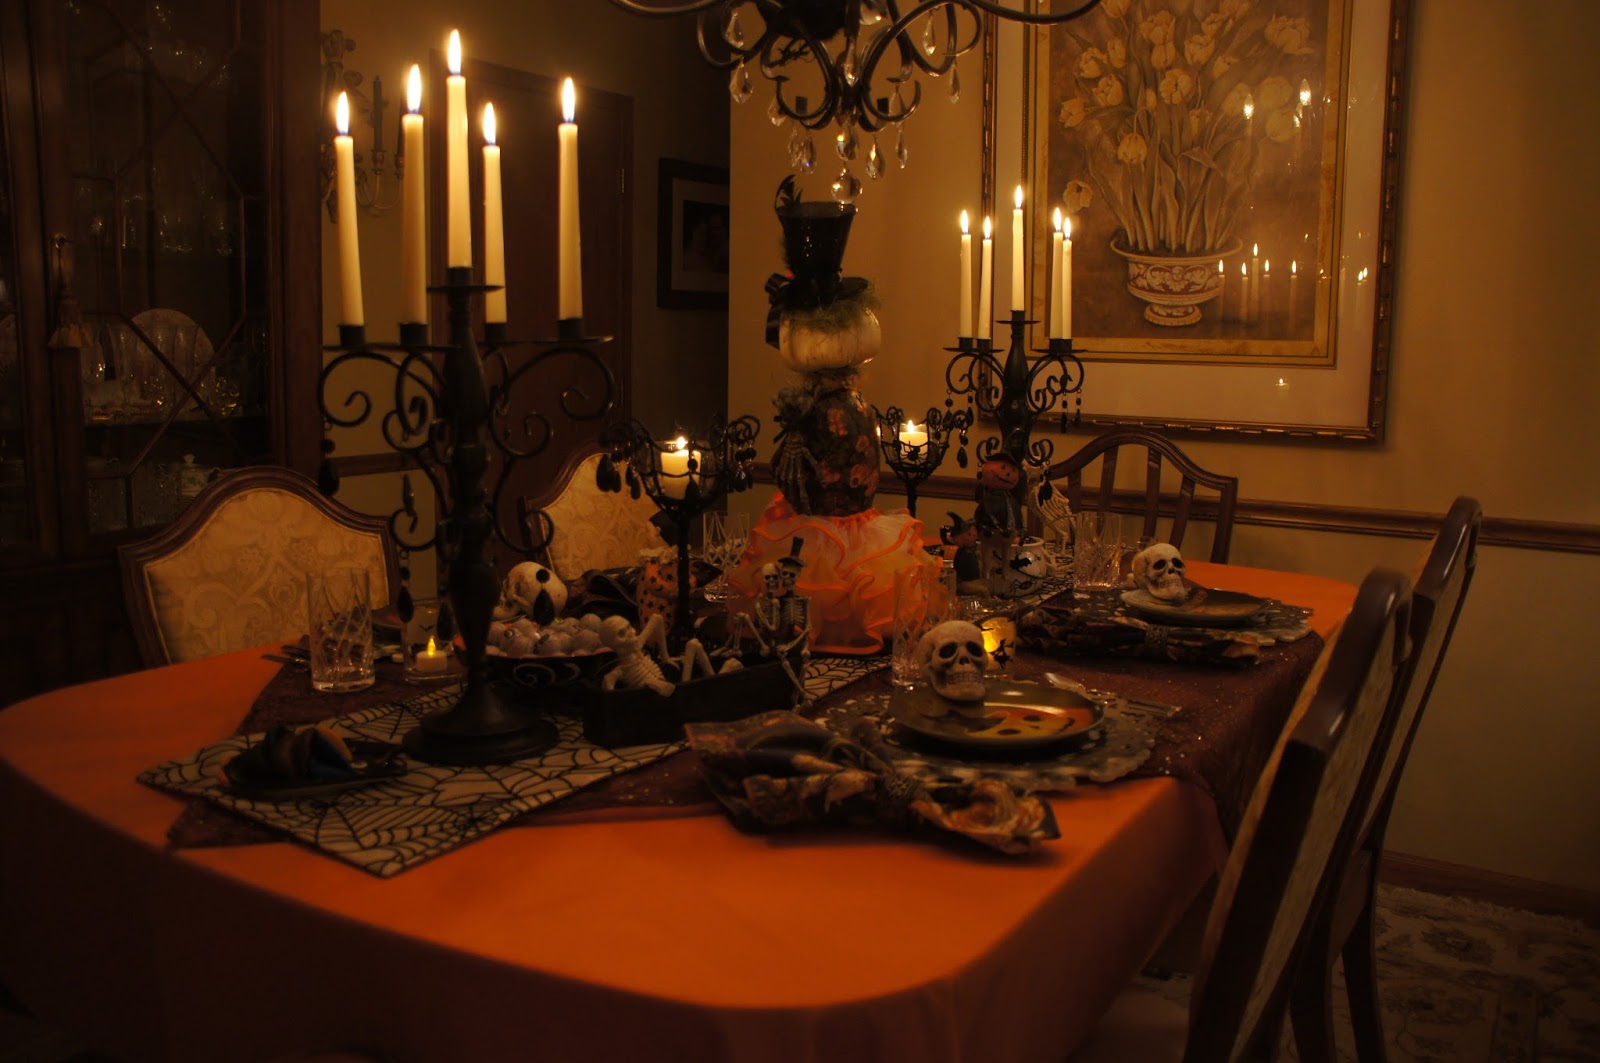 Home and Gardening With Liz: Halloween Dining with LuAnn! (T)